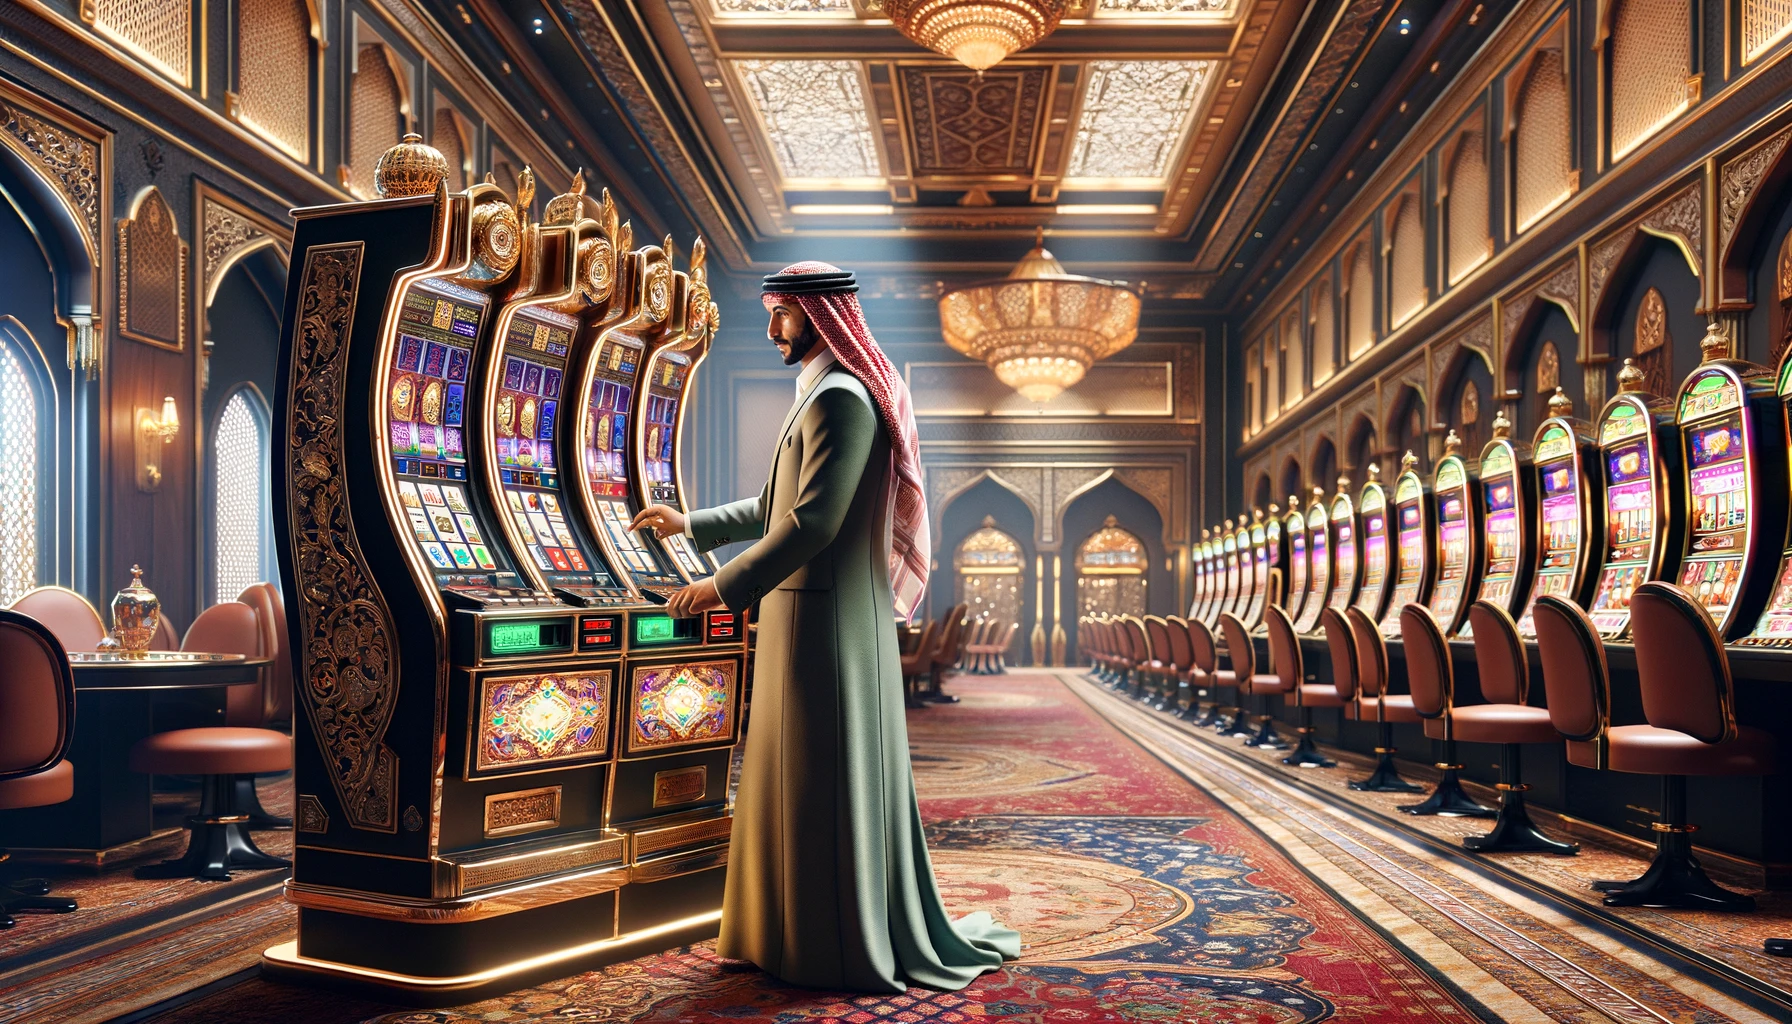 Create a realistic scene depicting the interior of an Arabian casino. In the foreground, an Arabian man in a luxurious suit is engaged in playing